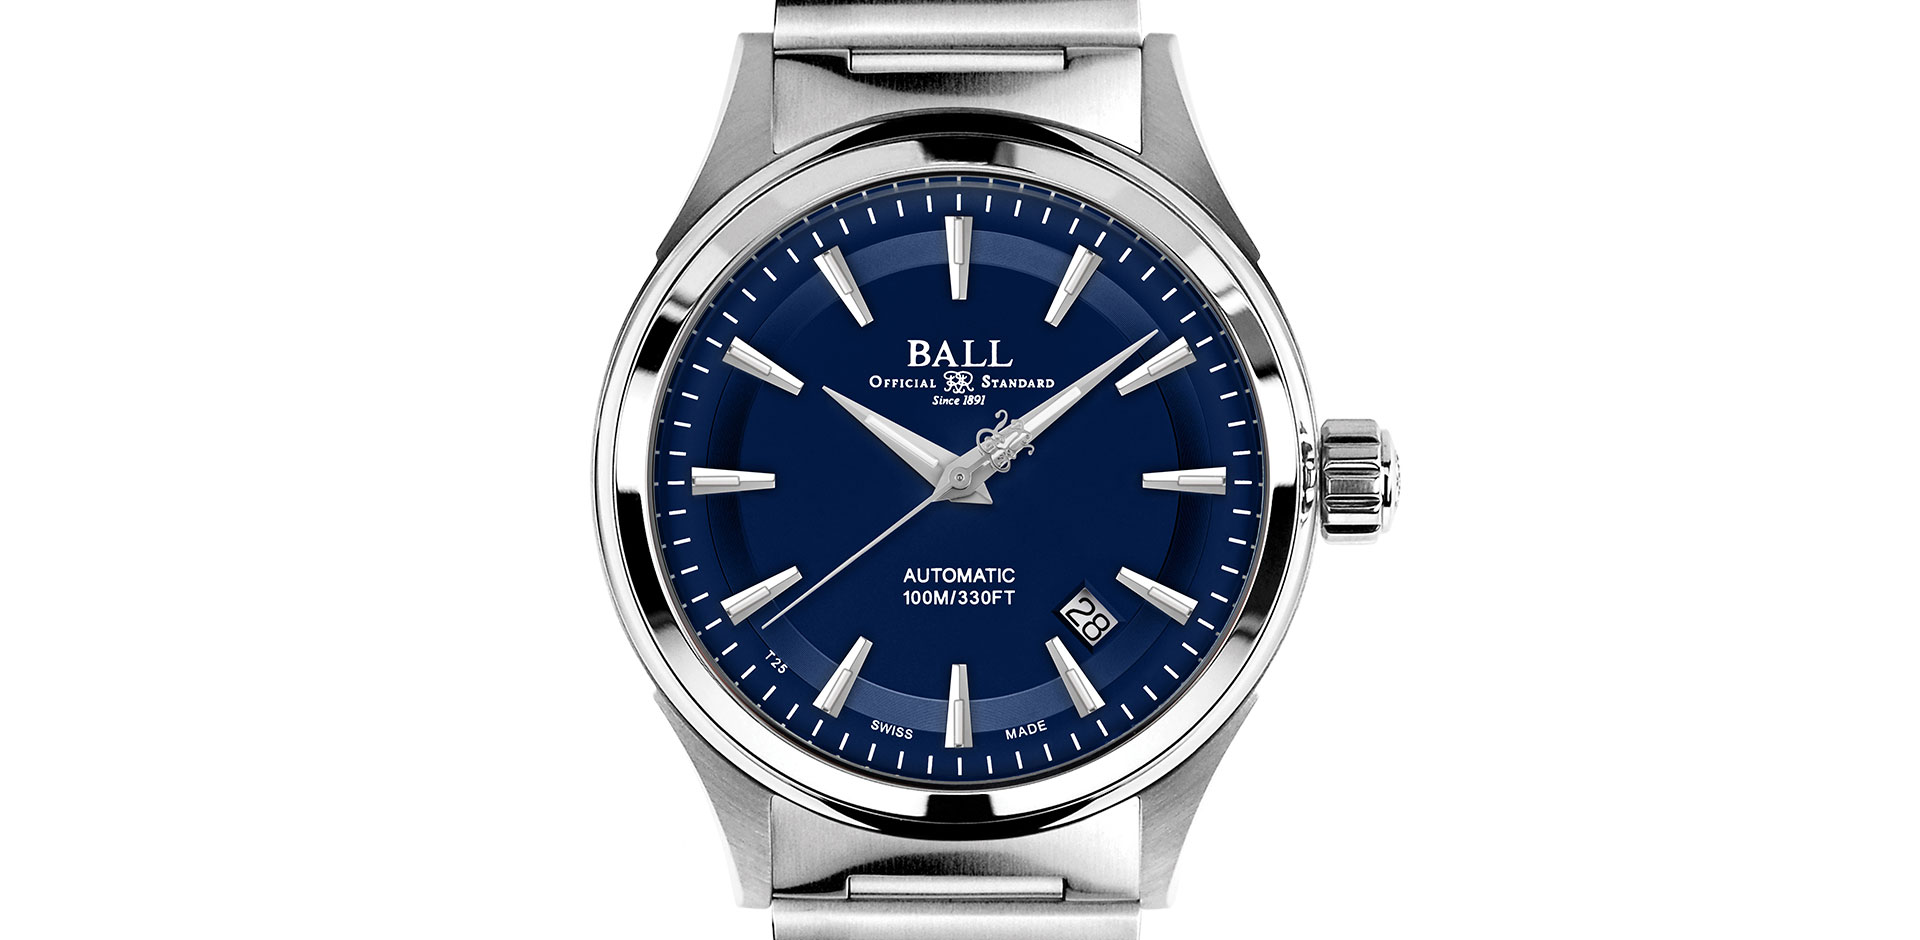 Clear Giveaways On Fake Raymond Weil Watch